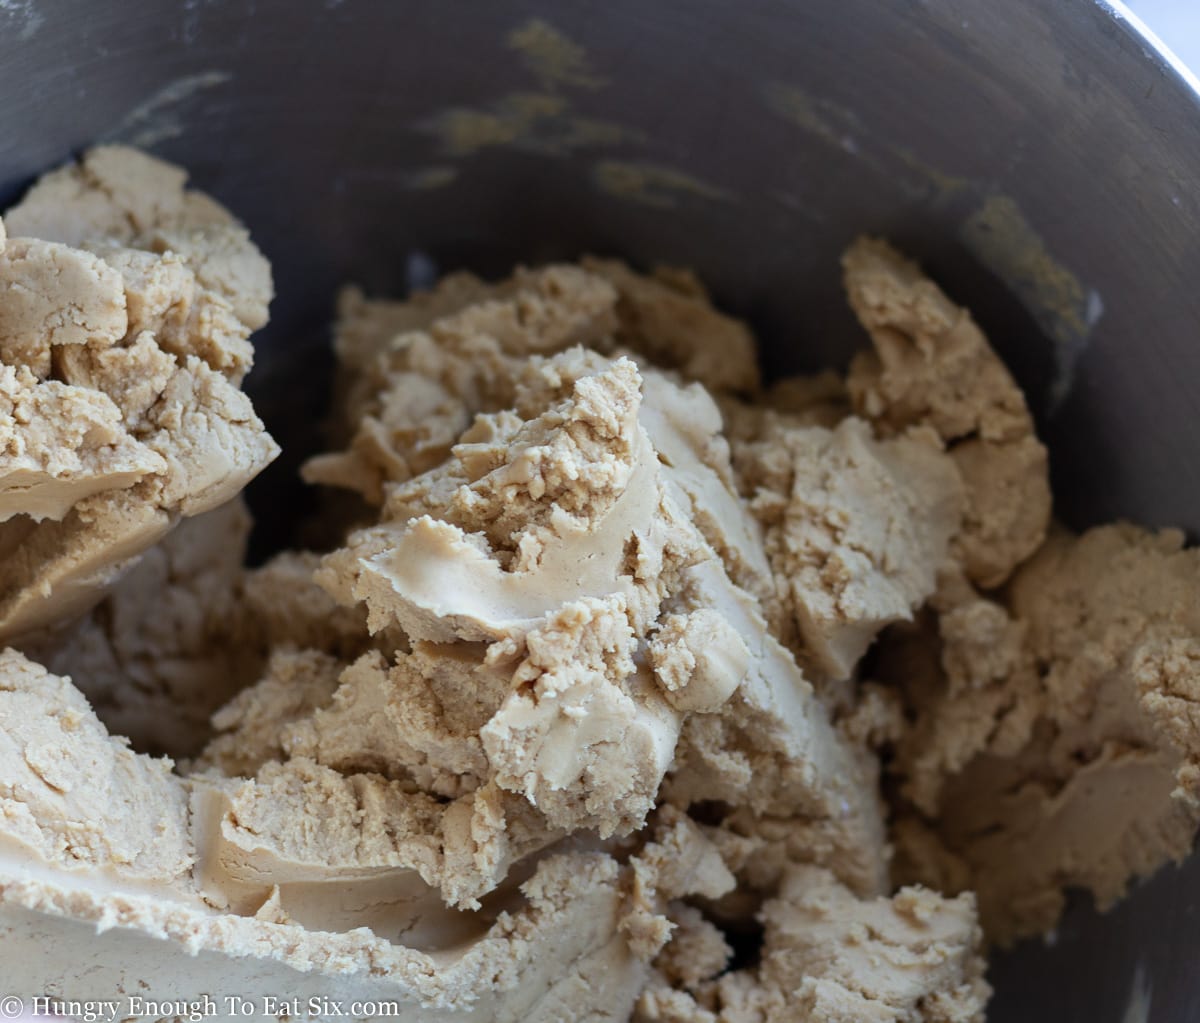 Peanut butter and sugar mixture in a mixing bowl